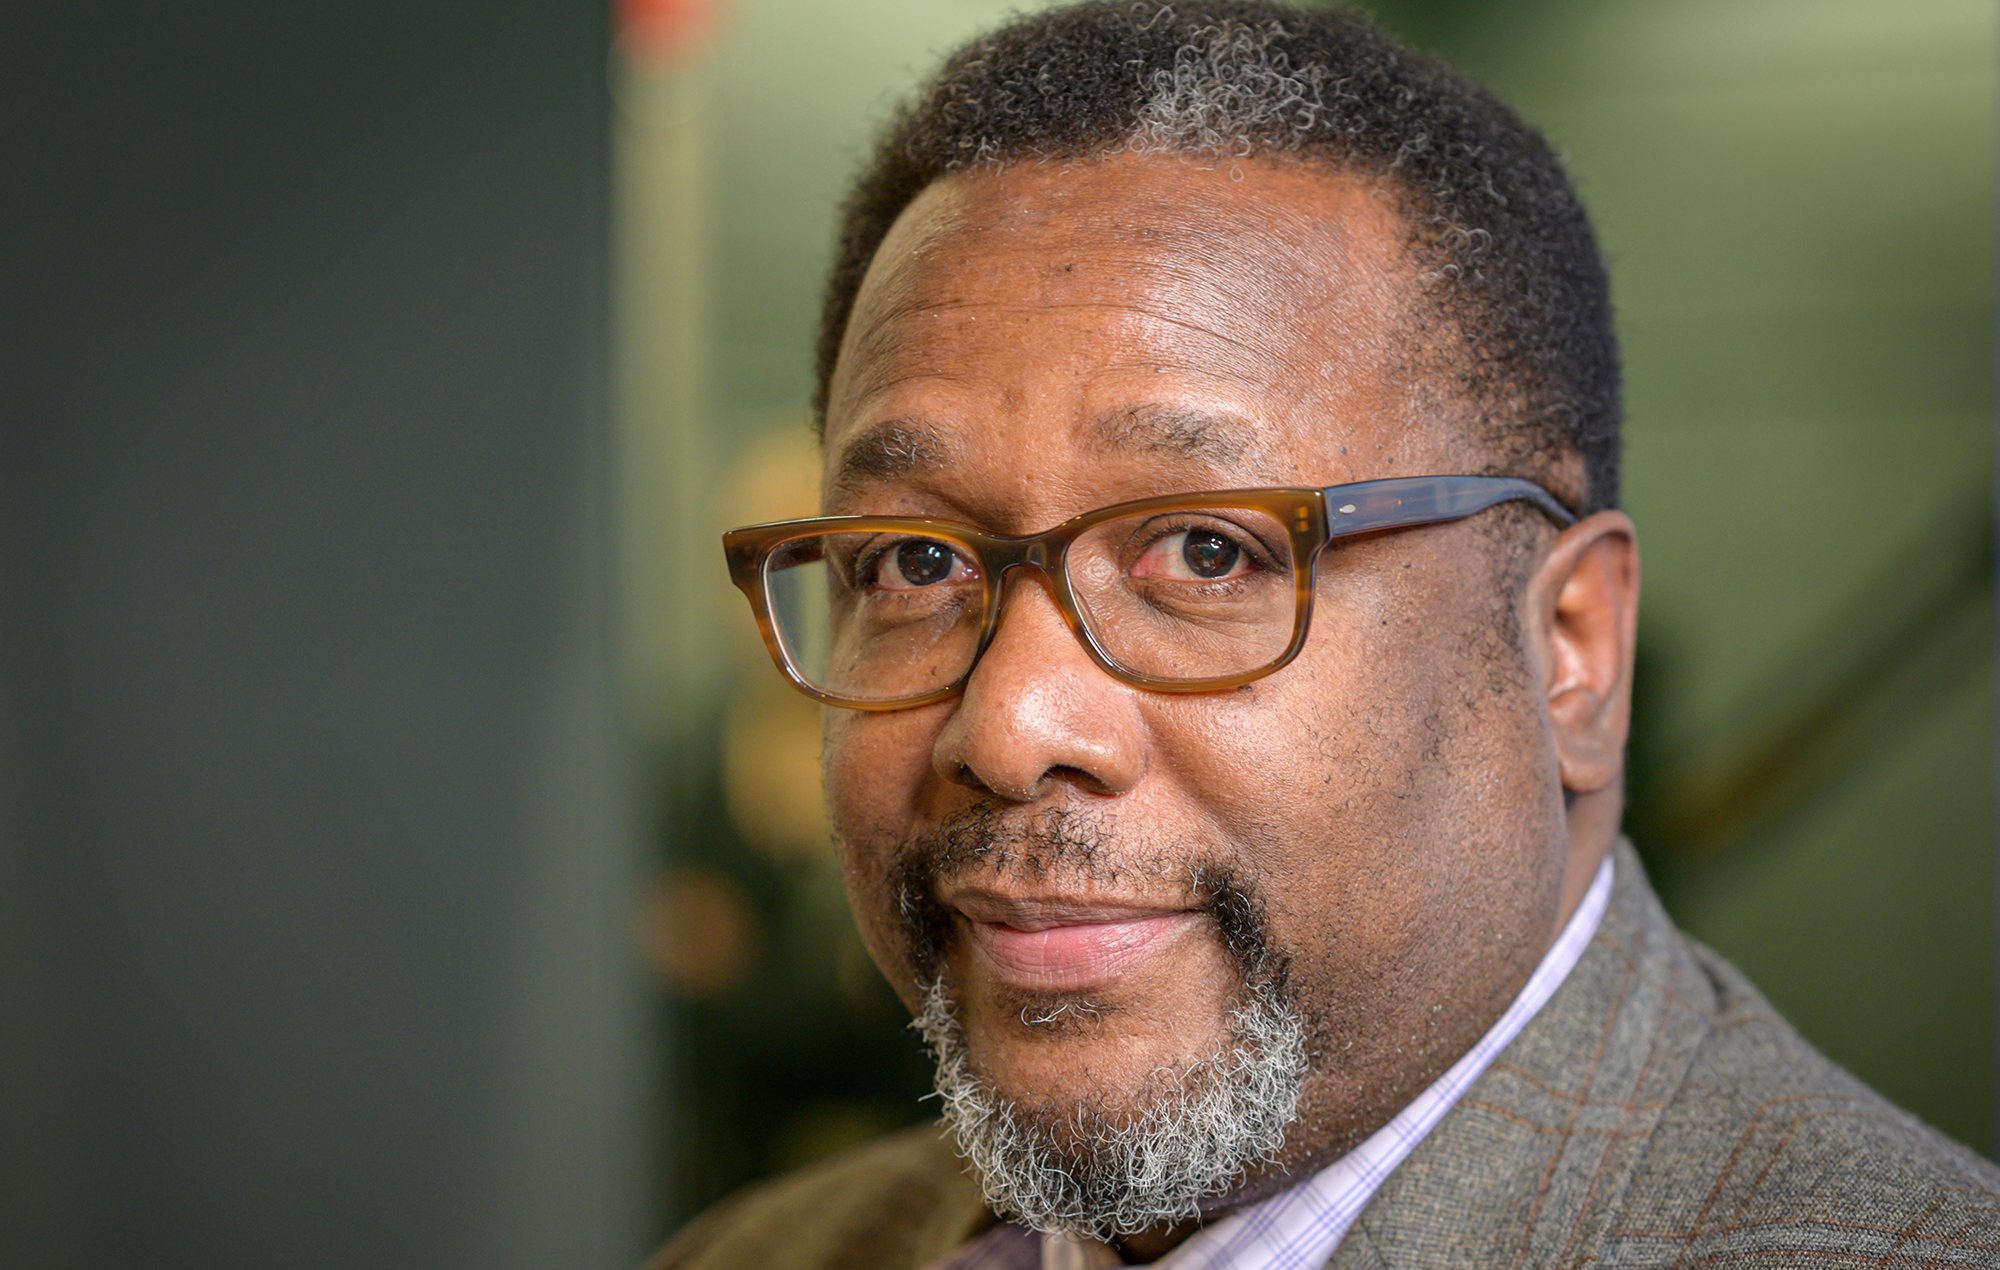 Wendell Pierce has not been contacted by 'Family Guy' over Cleveland role